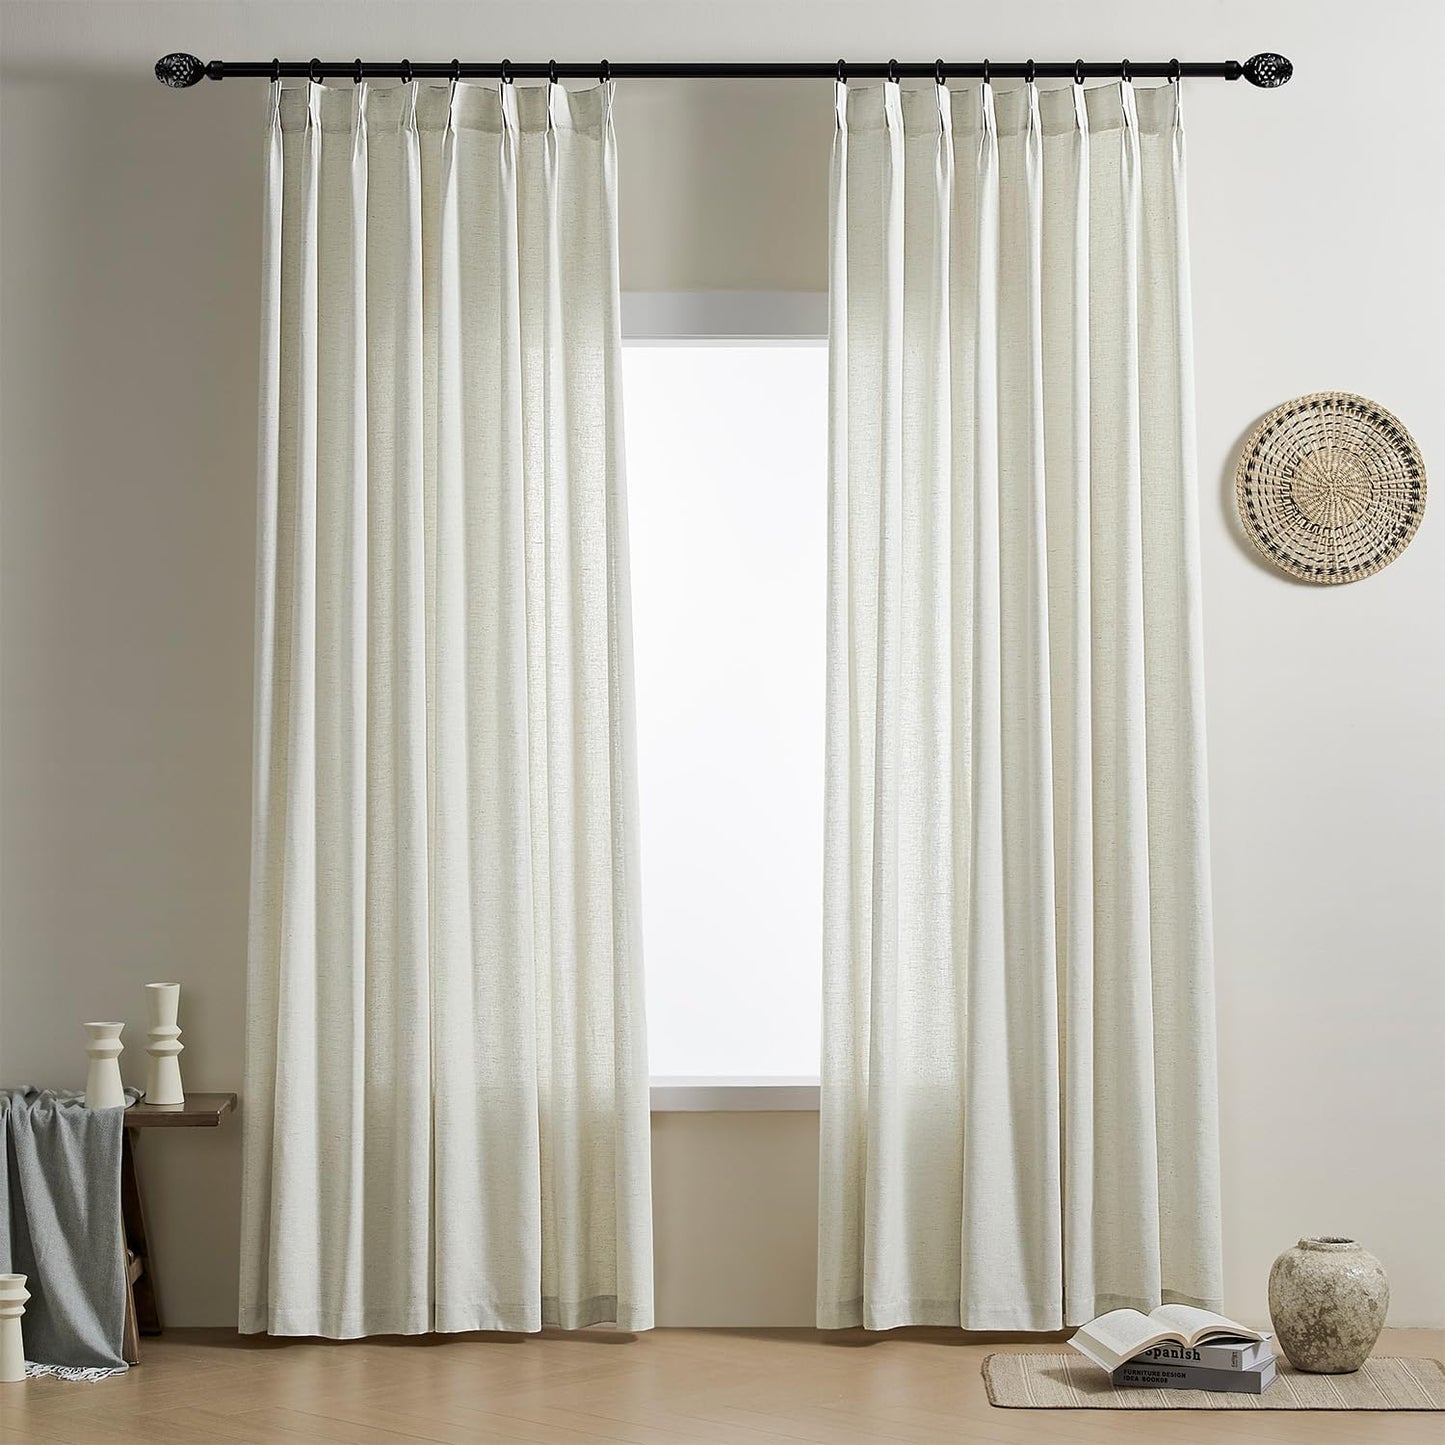 Rutterllow Pinch Pleated Flax Linen Curtains 80 Inch Length 2 Panels Set for Living Room Back Tab Semi Sheer Light Filtering Privacy Farmhouse Rustic Curtains for Bedroom  Rutterllow Oatmeal 50"W X 90"L X2 